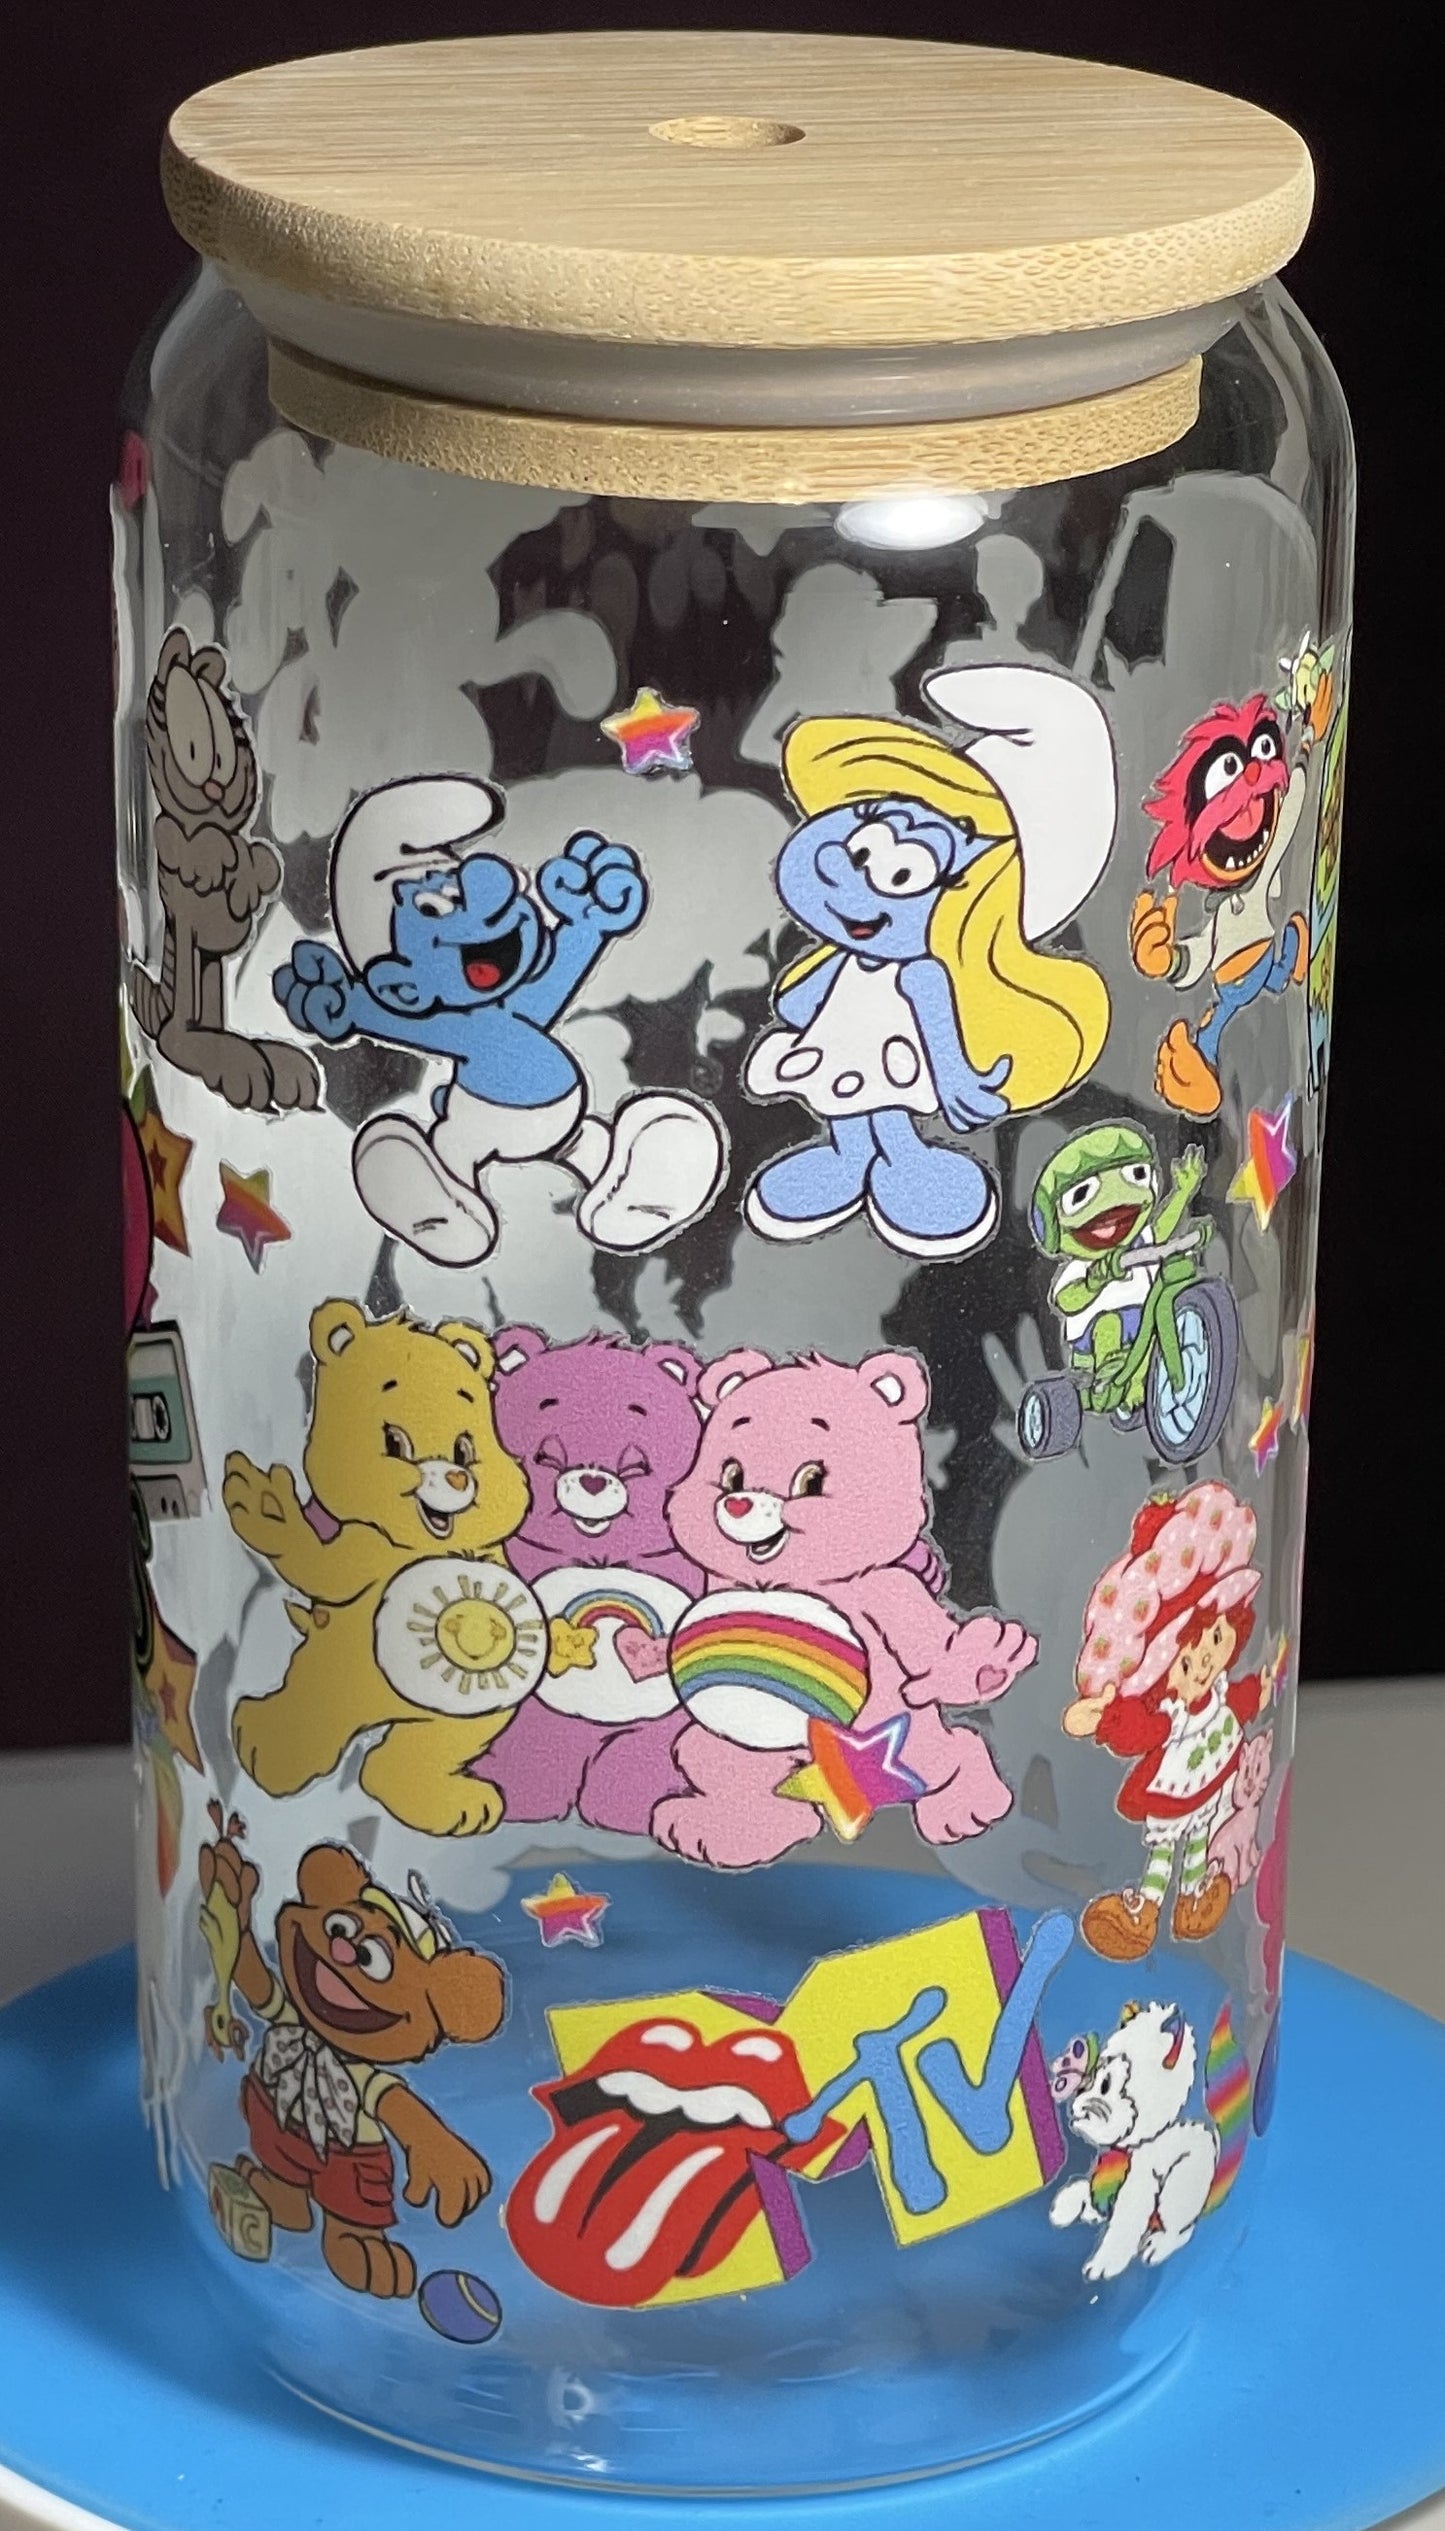 I love the 80's 16oz Glass Cup